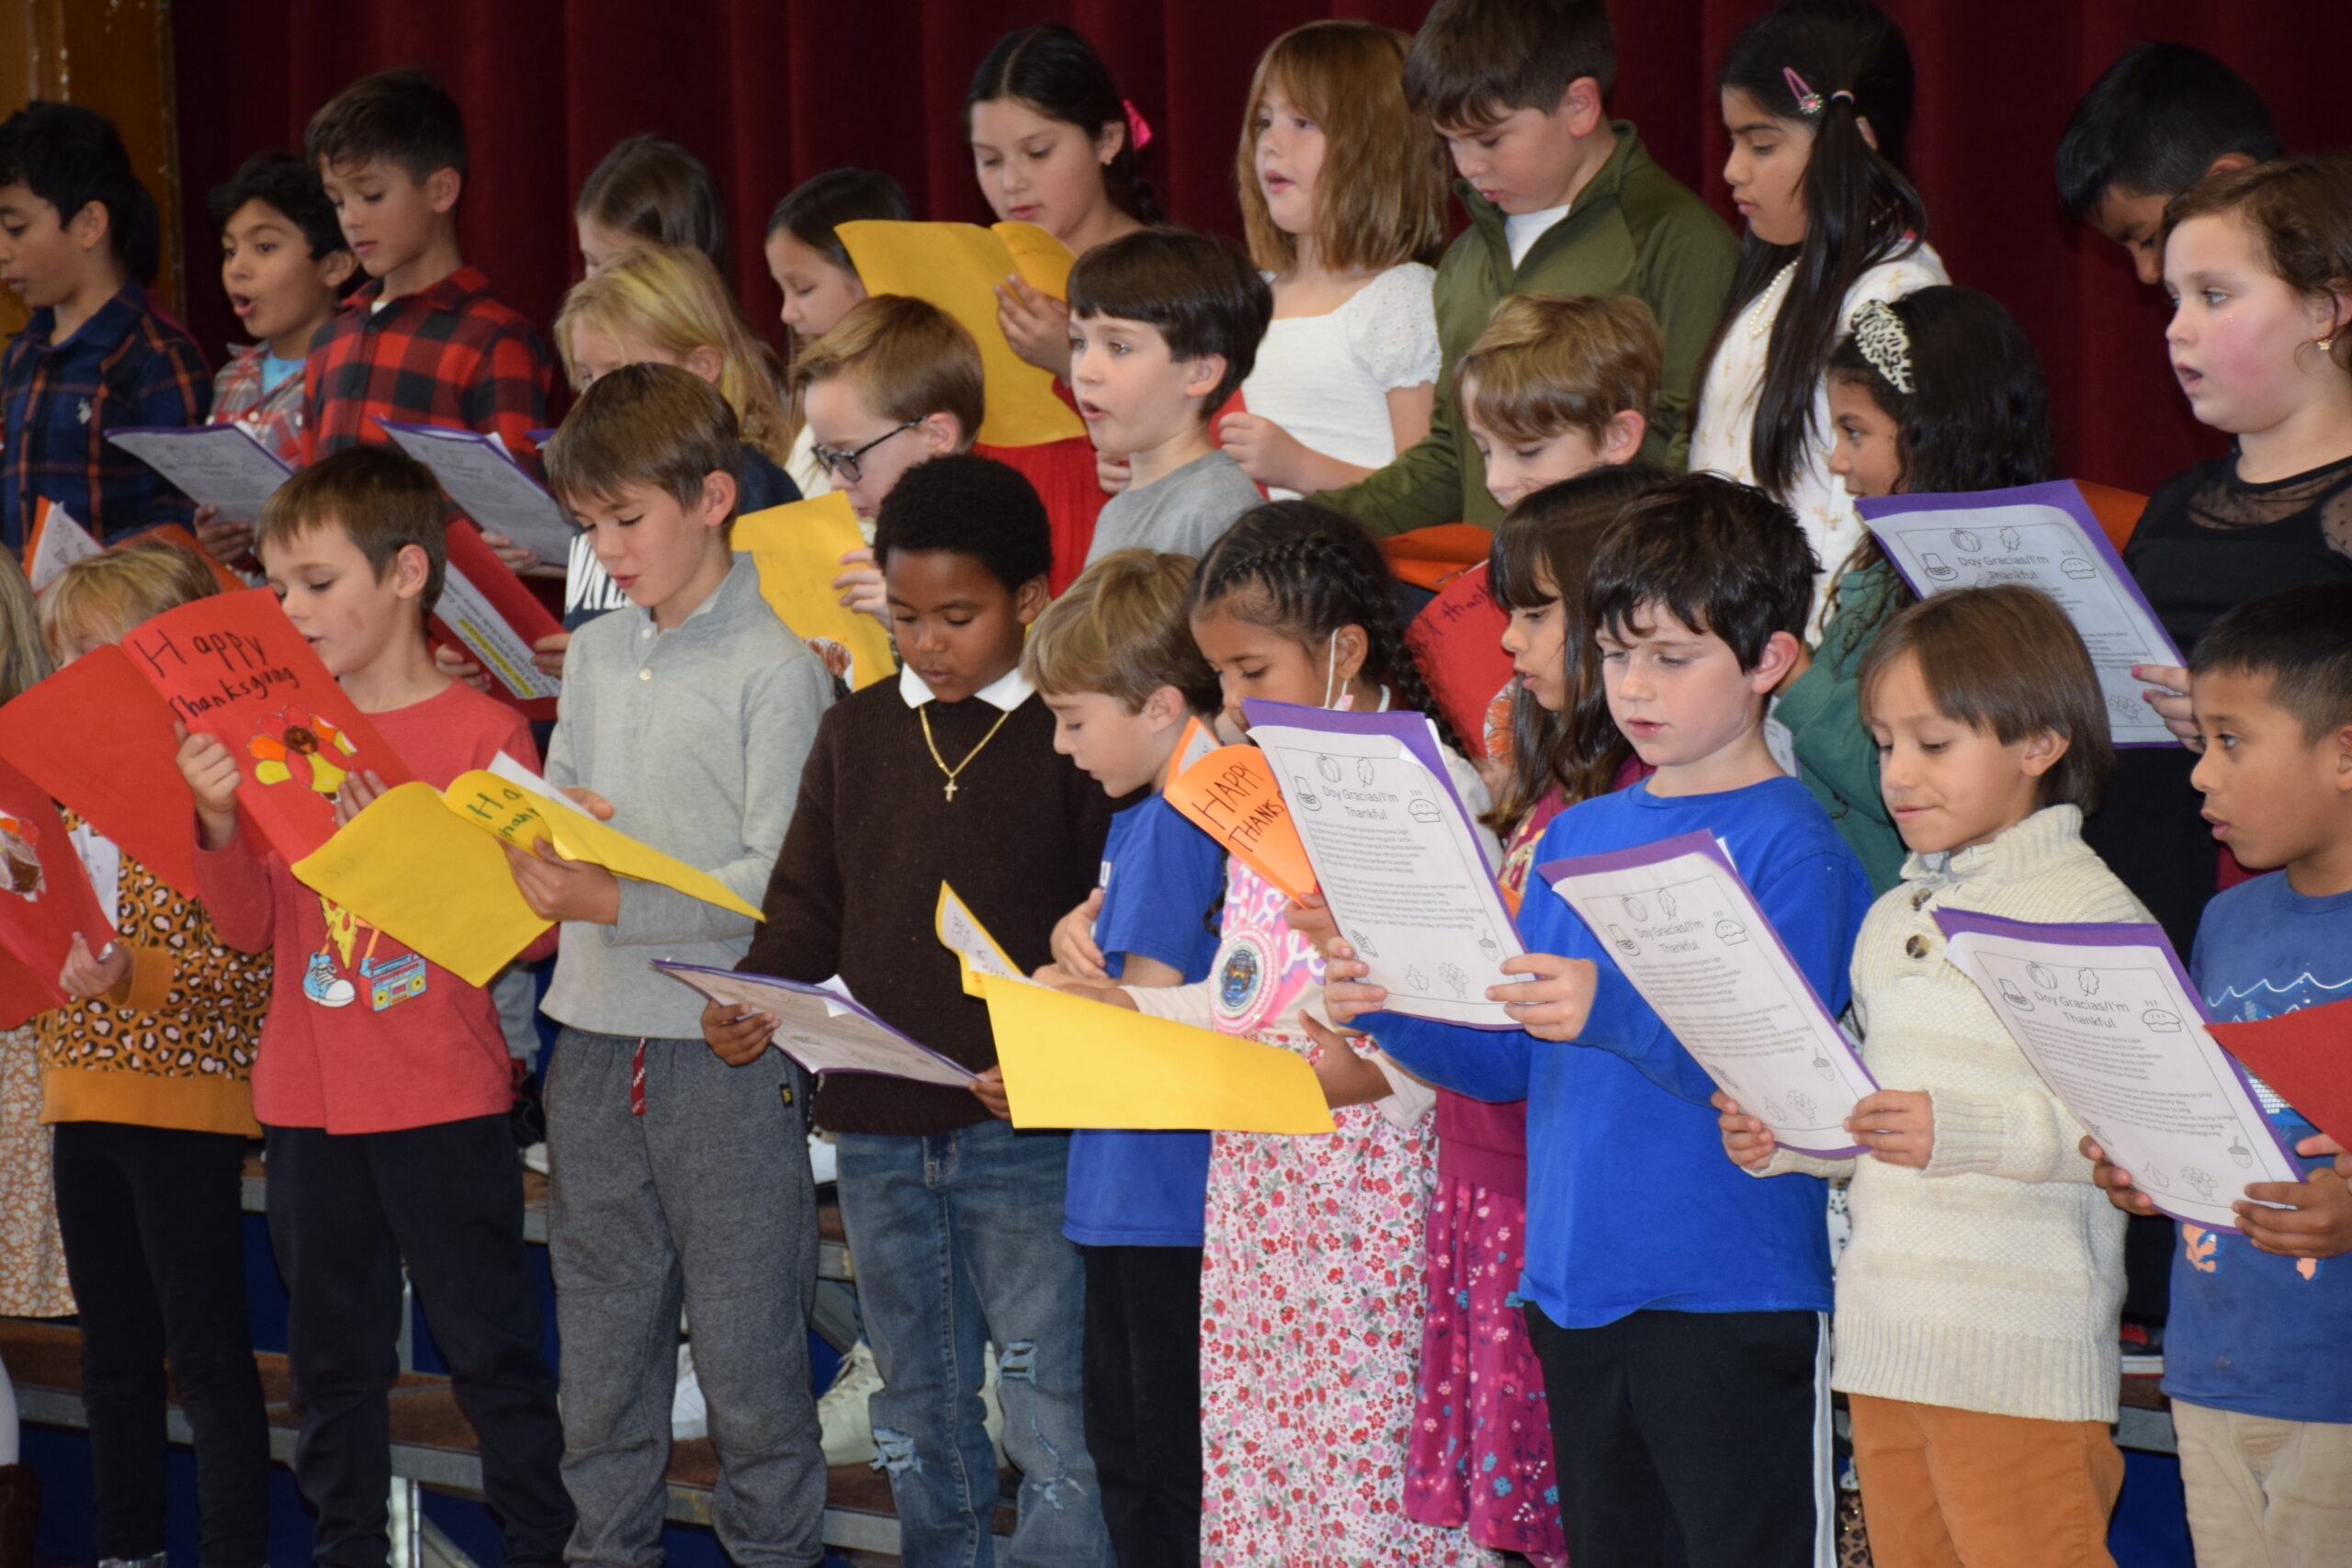 Southampton Elementary School hosted its annual second grade Thanksgiving gathering on November 18. The event focused on family and community, with students performing songs, sharing a Thanksgiving poem and enjoying some tasty pie with their families. COURTESY SOUTHAMPTON SCHOOL DISTRICT